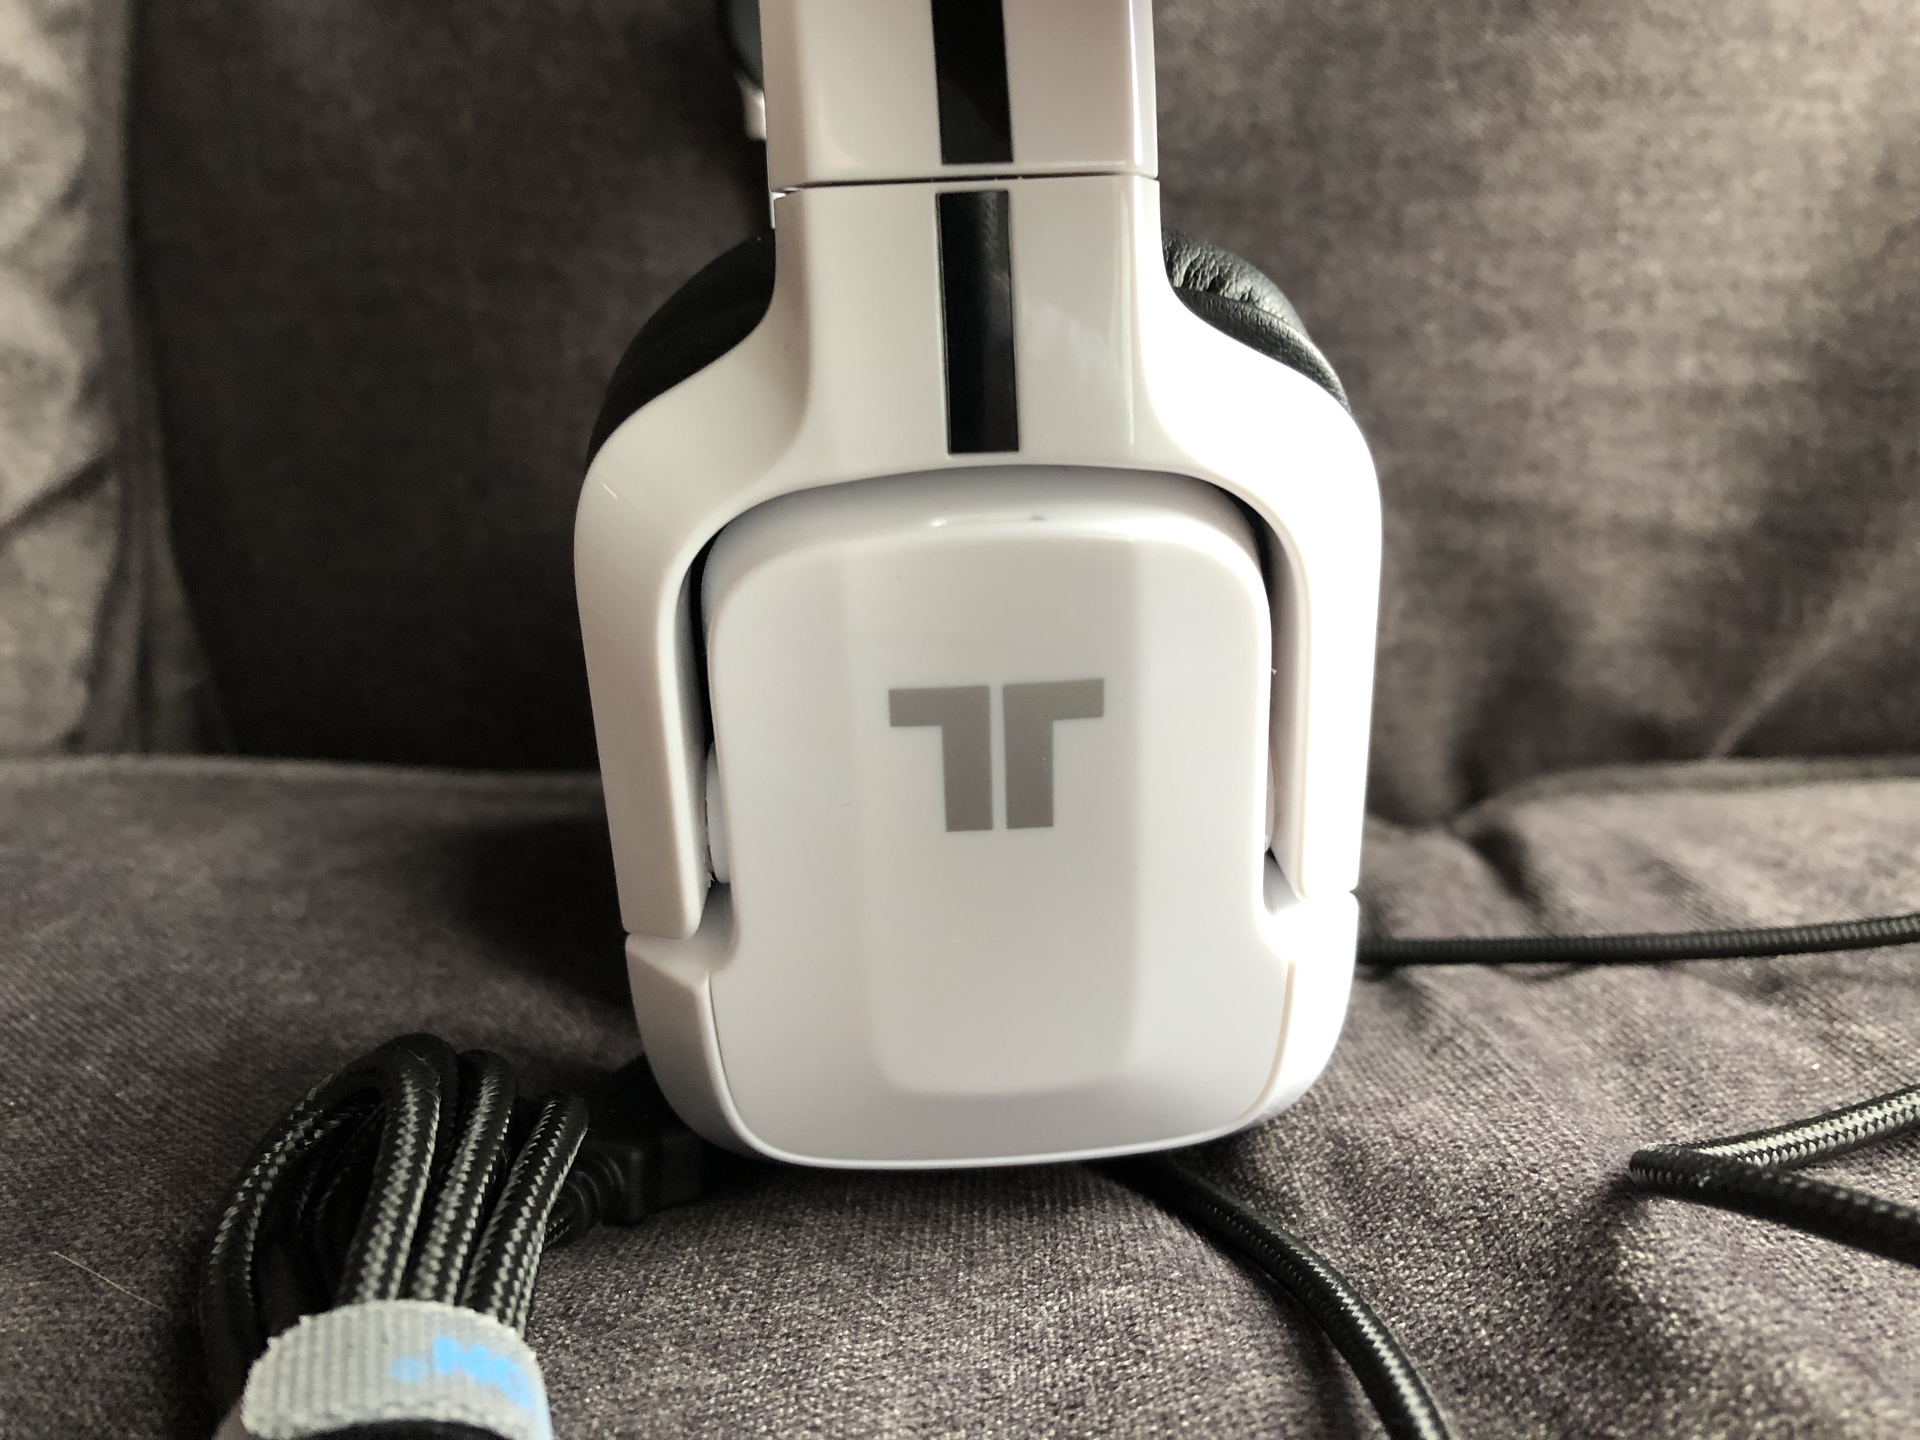 Tritton Kunai Pro Review: An Affordable Headset with Expensive Sound